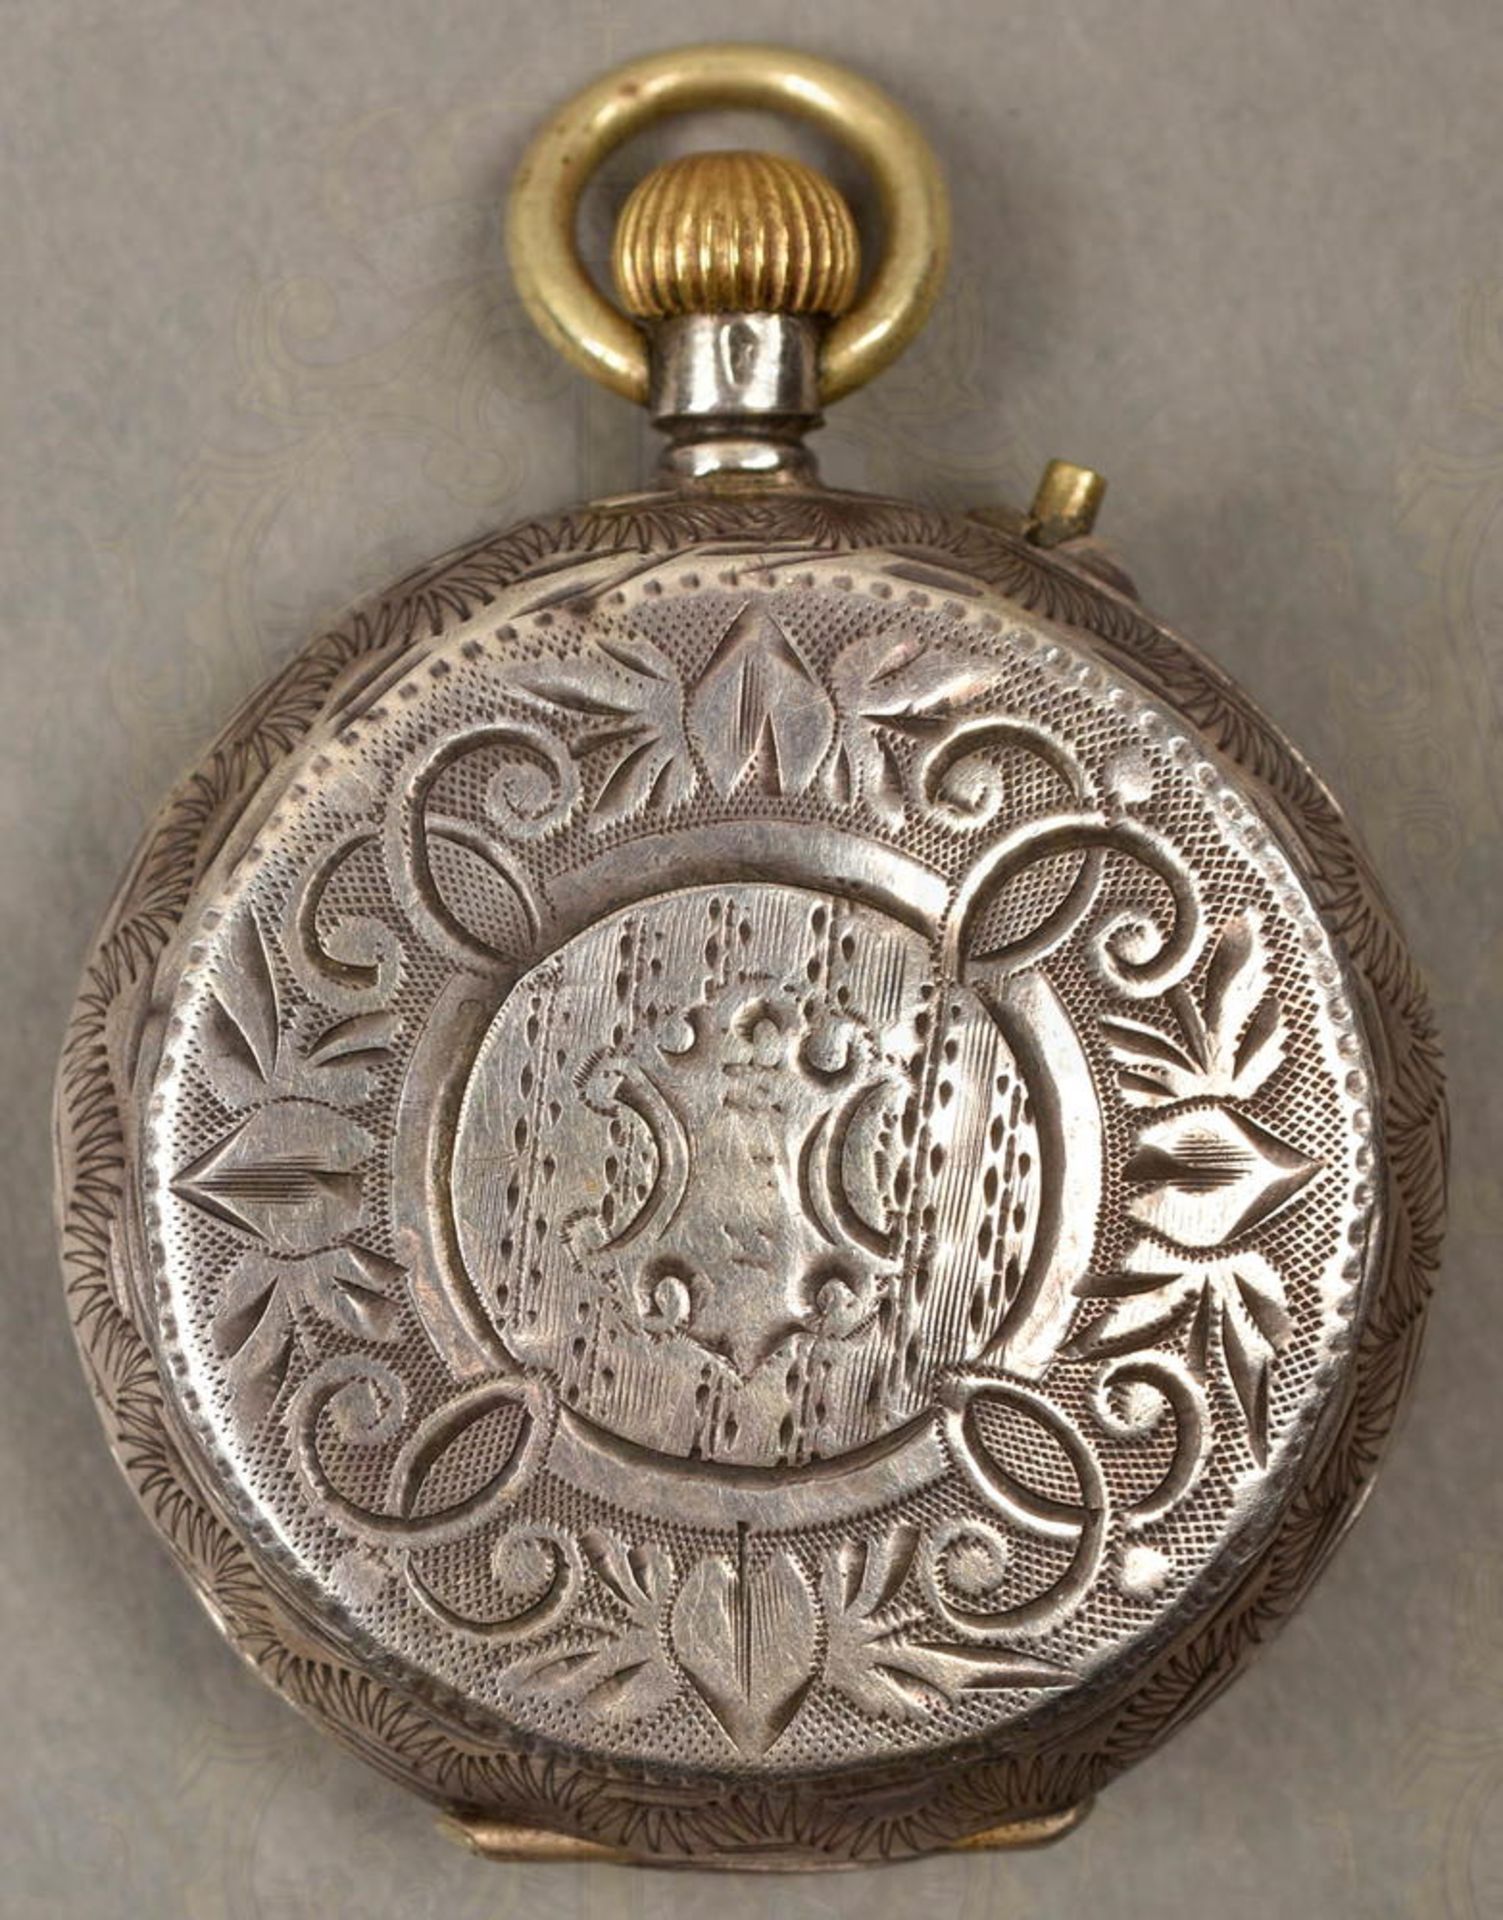 Small silver pocket watch with case - Image 2 of 3